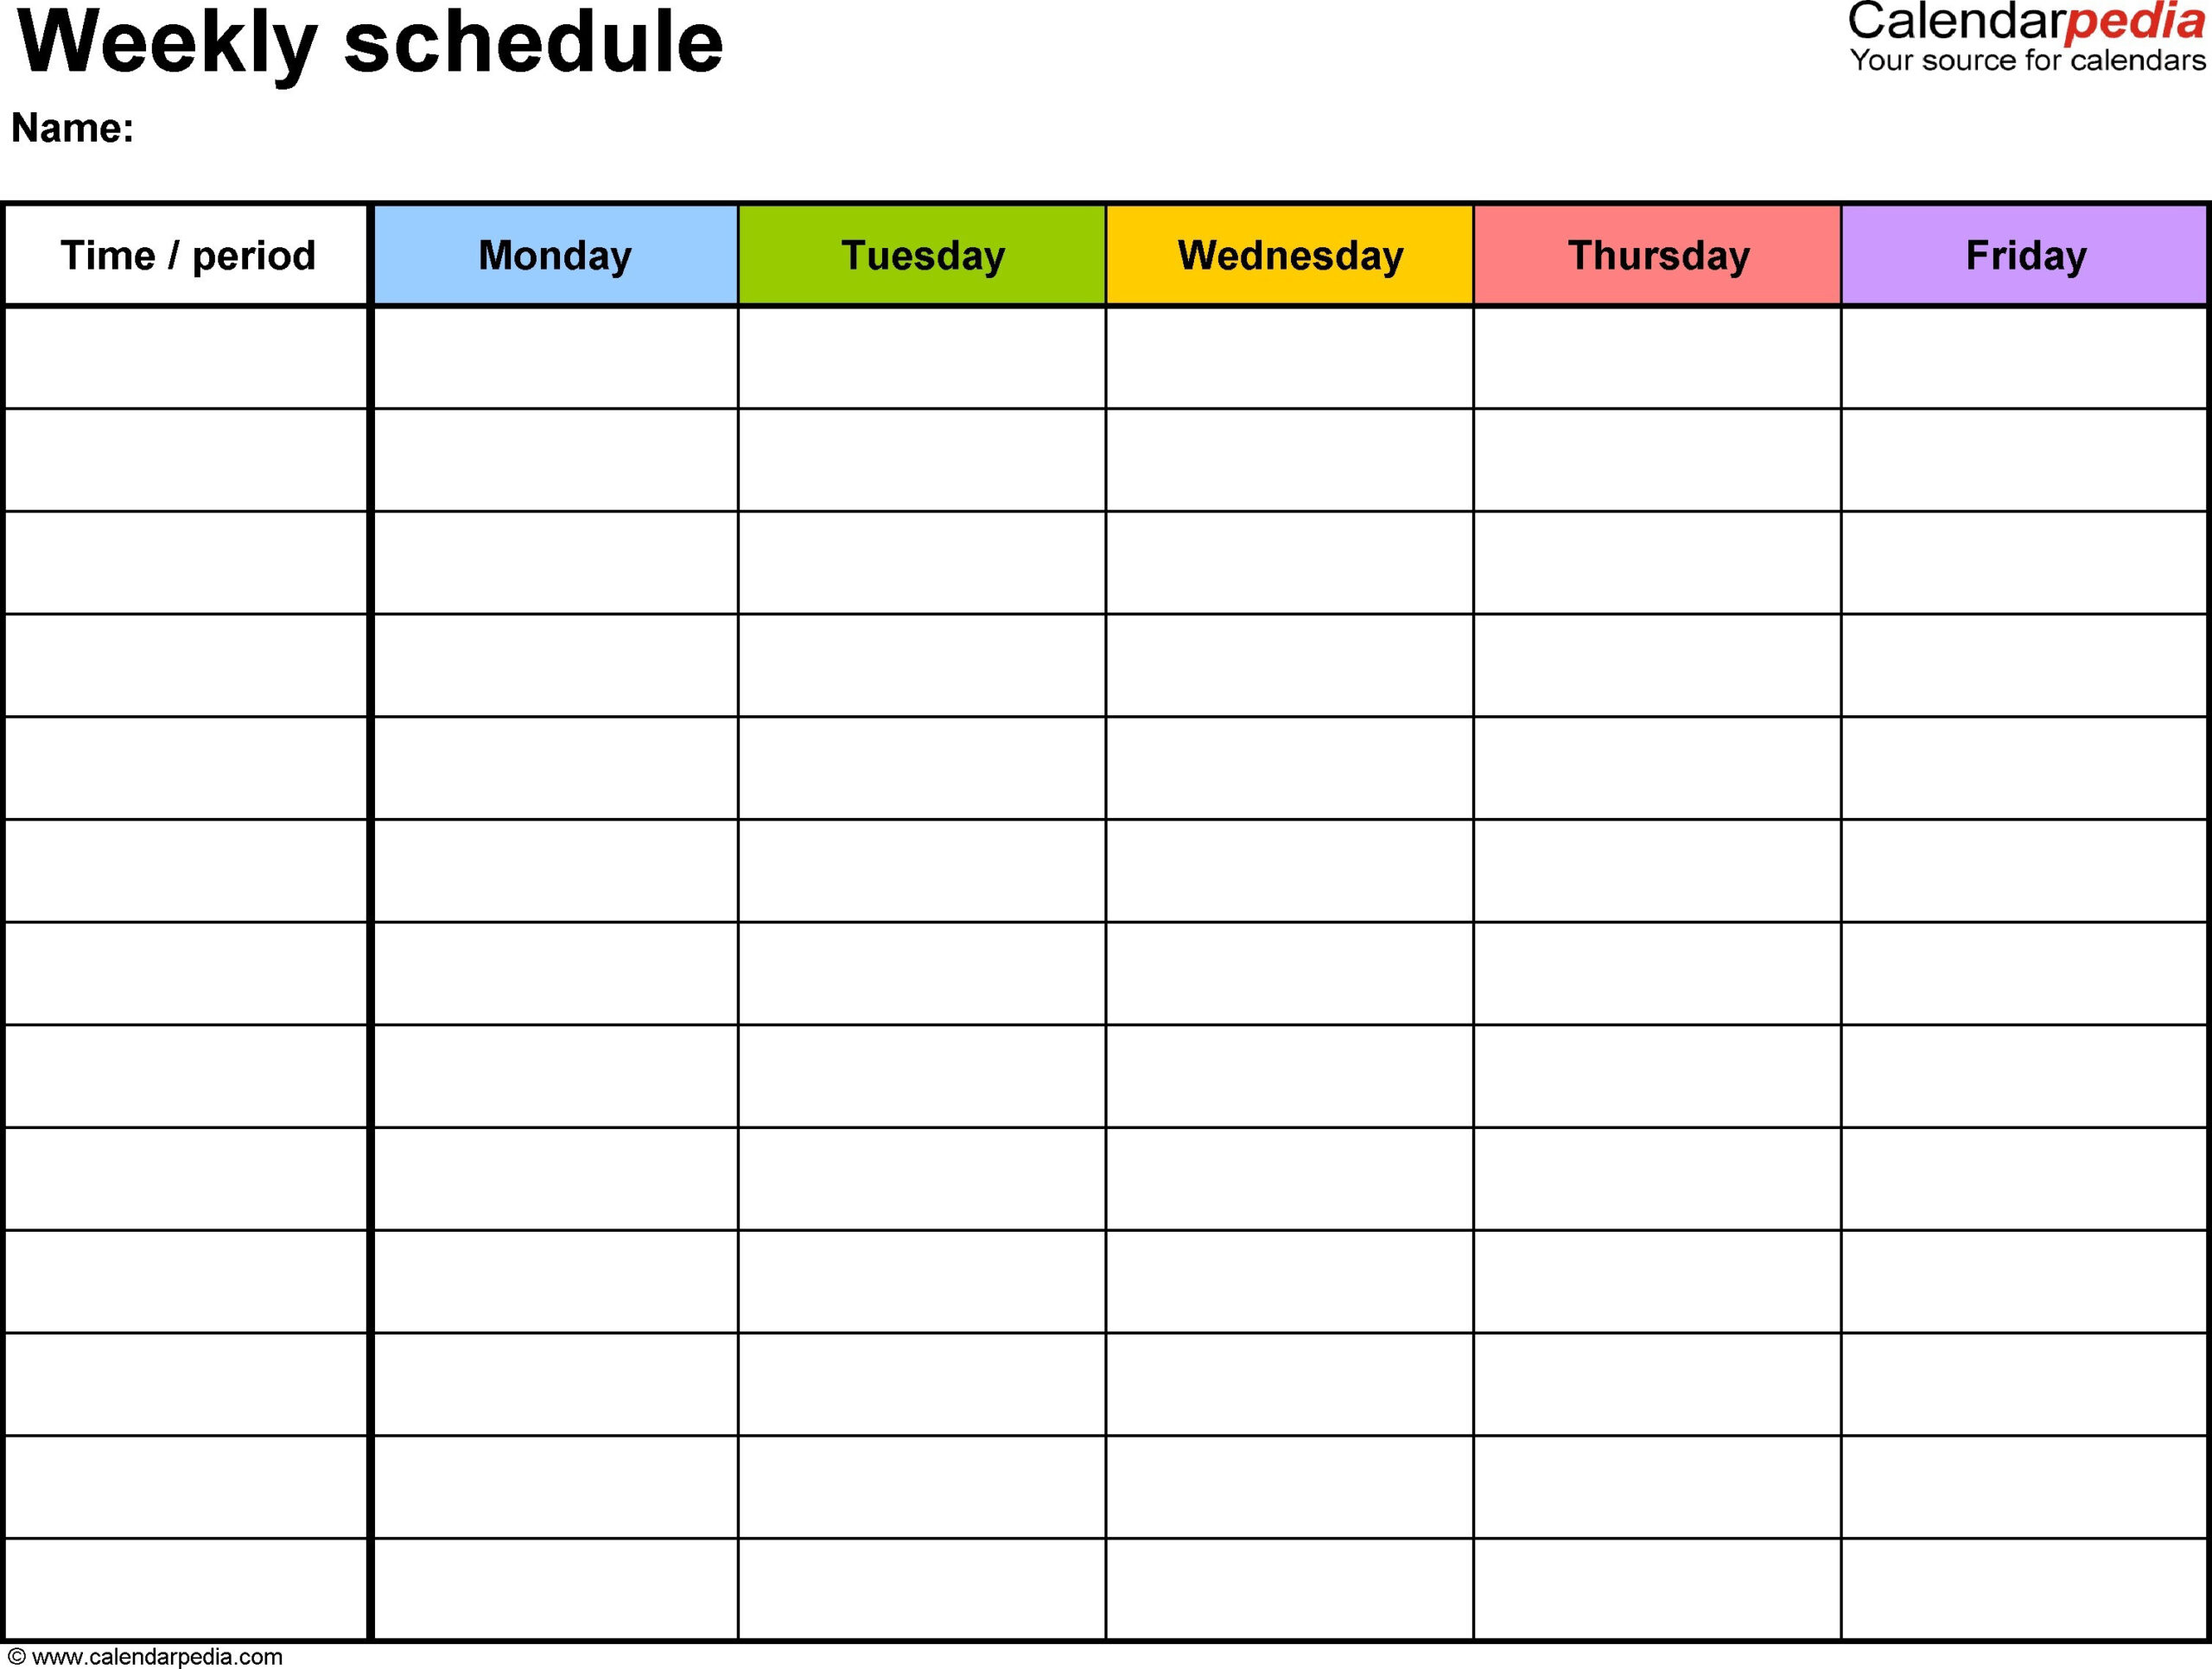 Blank Calendar With Time Slots | Example Calendar Printable  Time Printable Calendar Time Slot